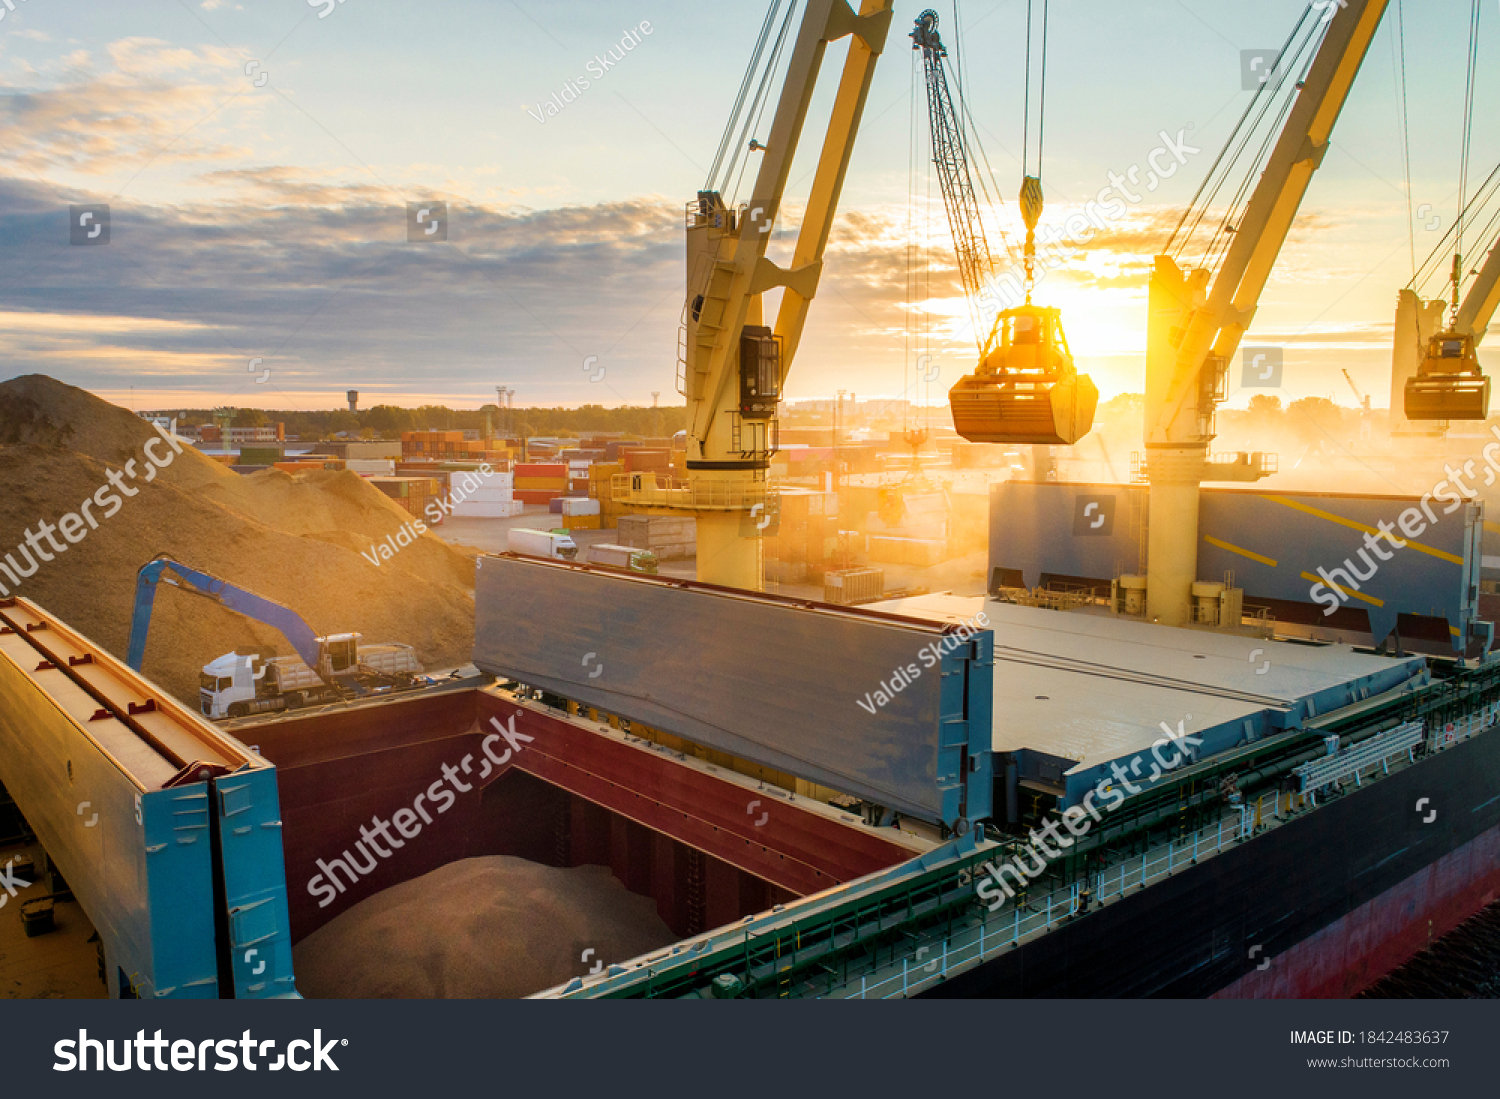 Large international transportation vessel in the port, loading grain during sunrise for export in the sea waters. #1842483637